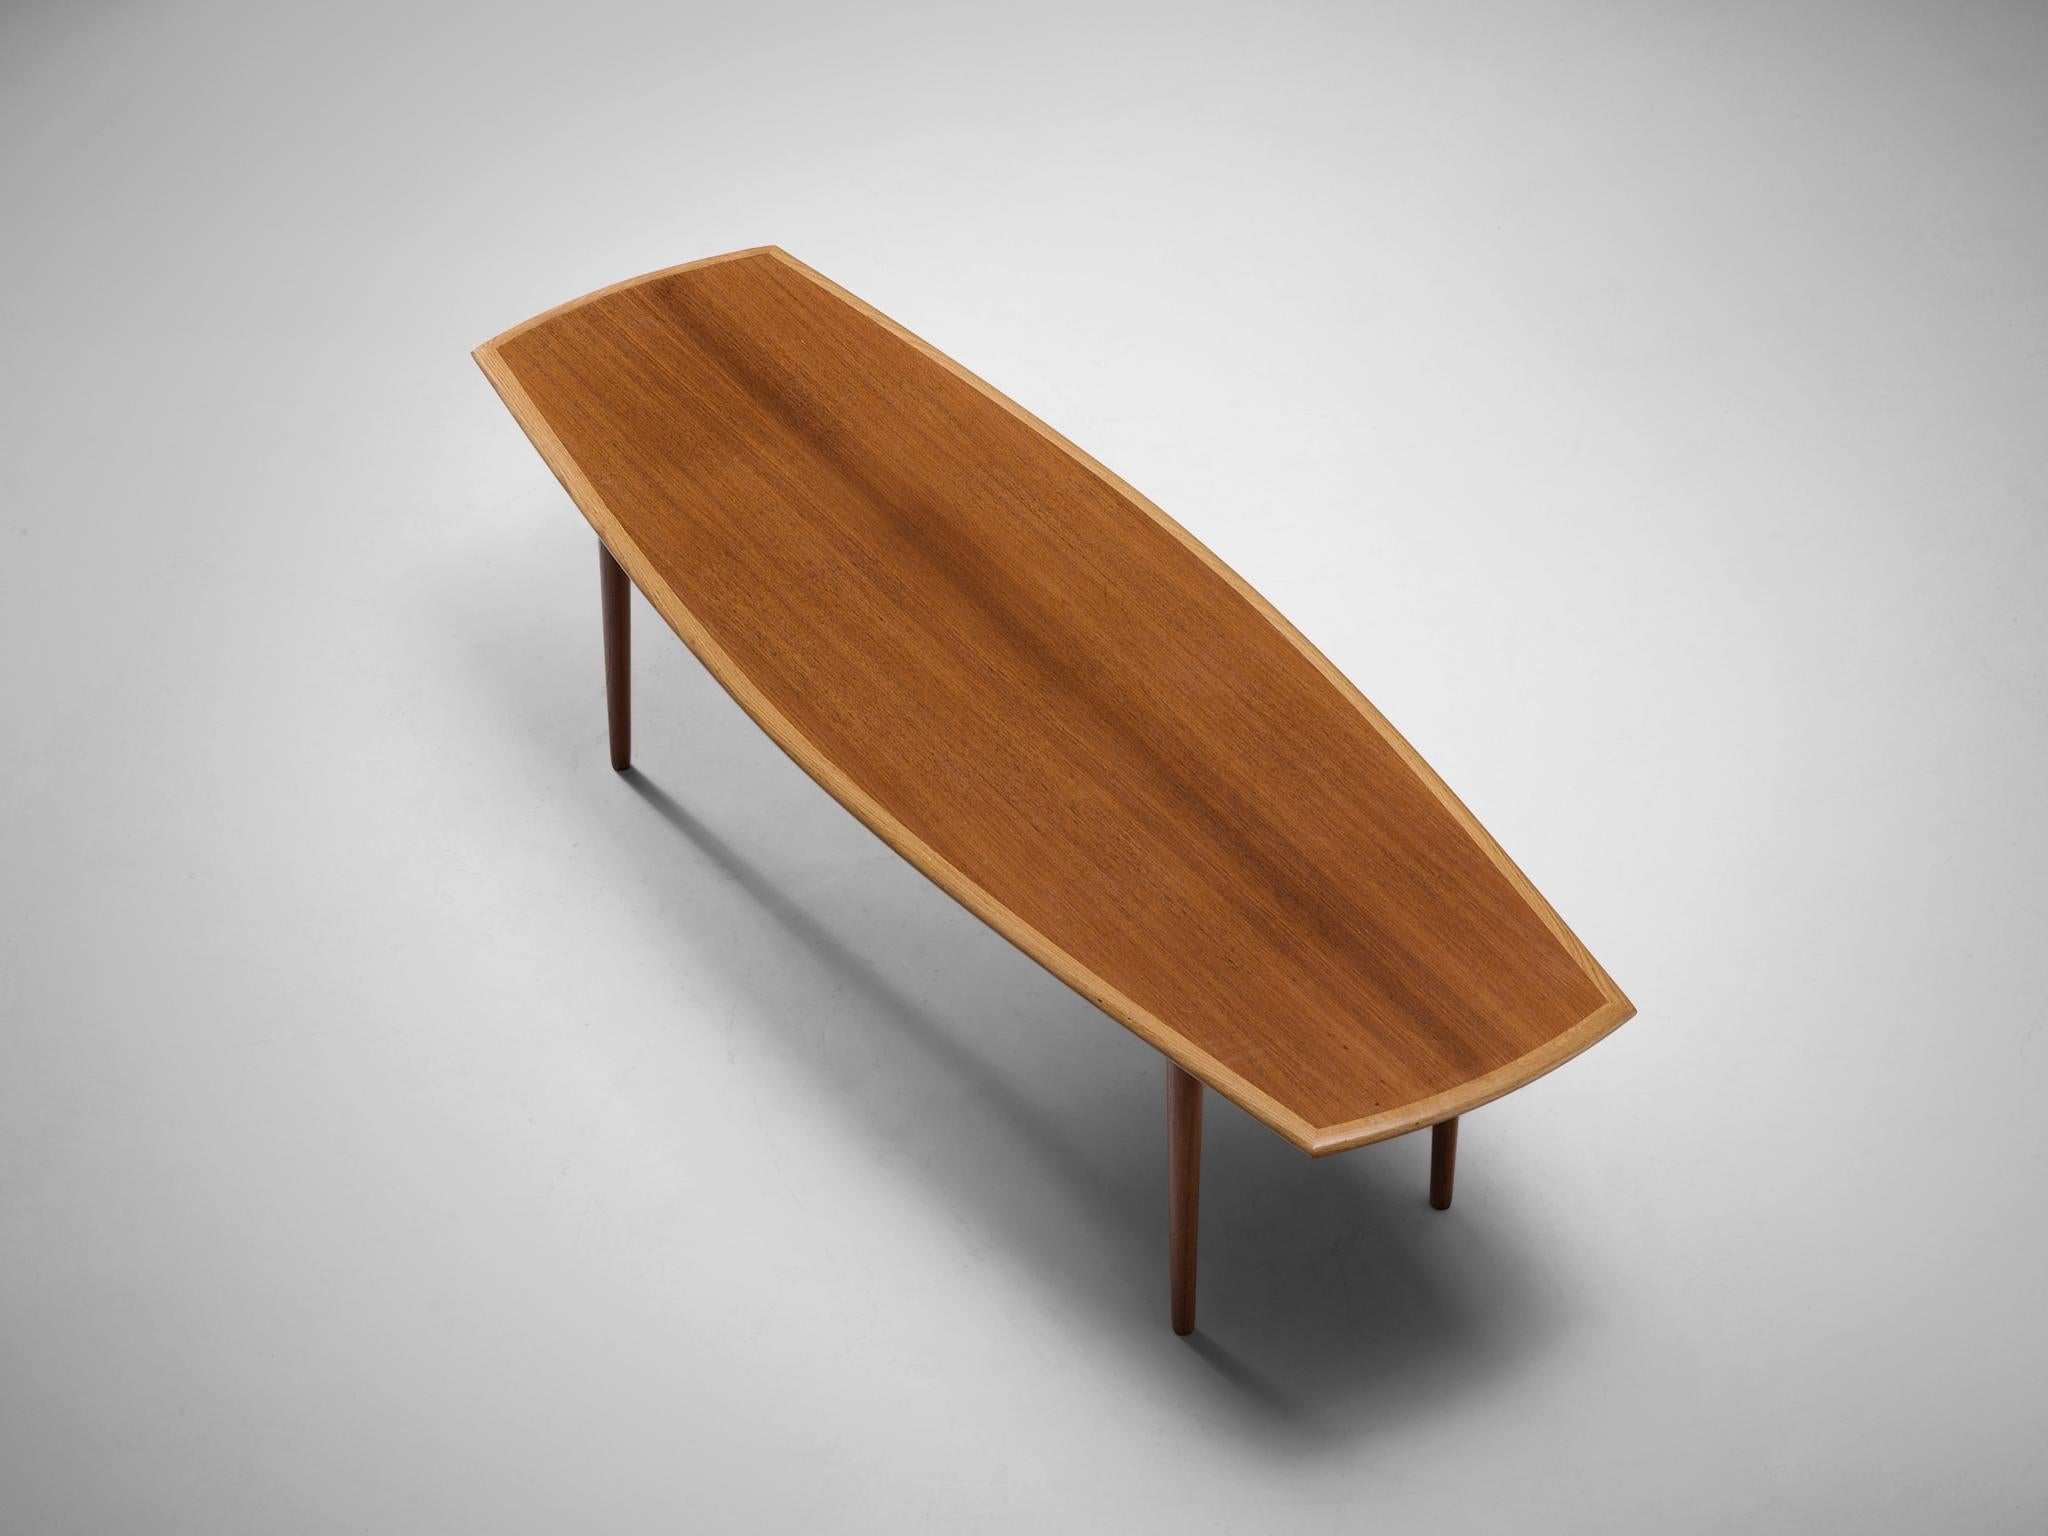 Coffee table, oak, teak, Scandinavia, 1950s

This minimalist and modest table has a barrel shaped top and four cylindrical tapered legs. The table is 160cm wide and can function as a side, coffee or cocktail table. The border of the teak top is